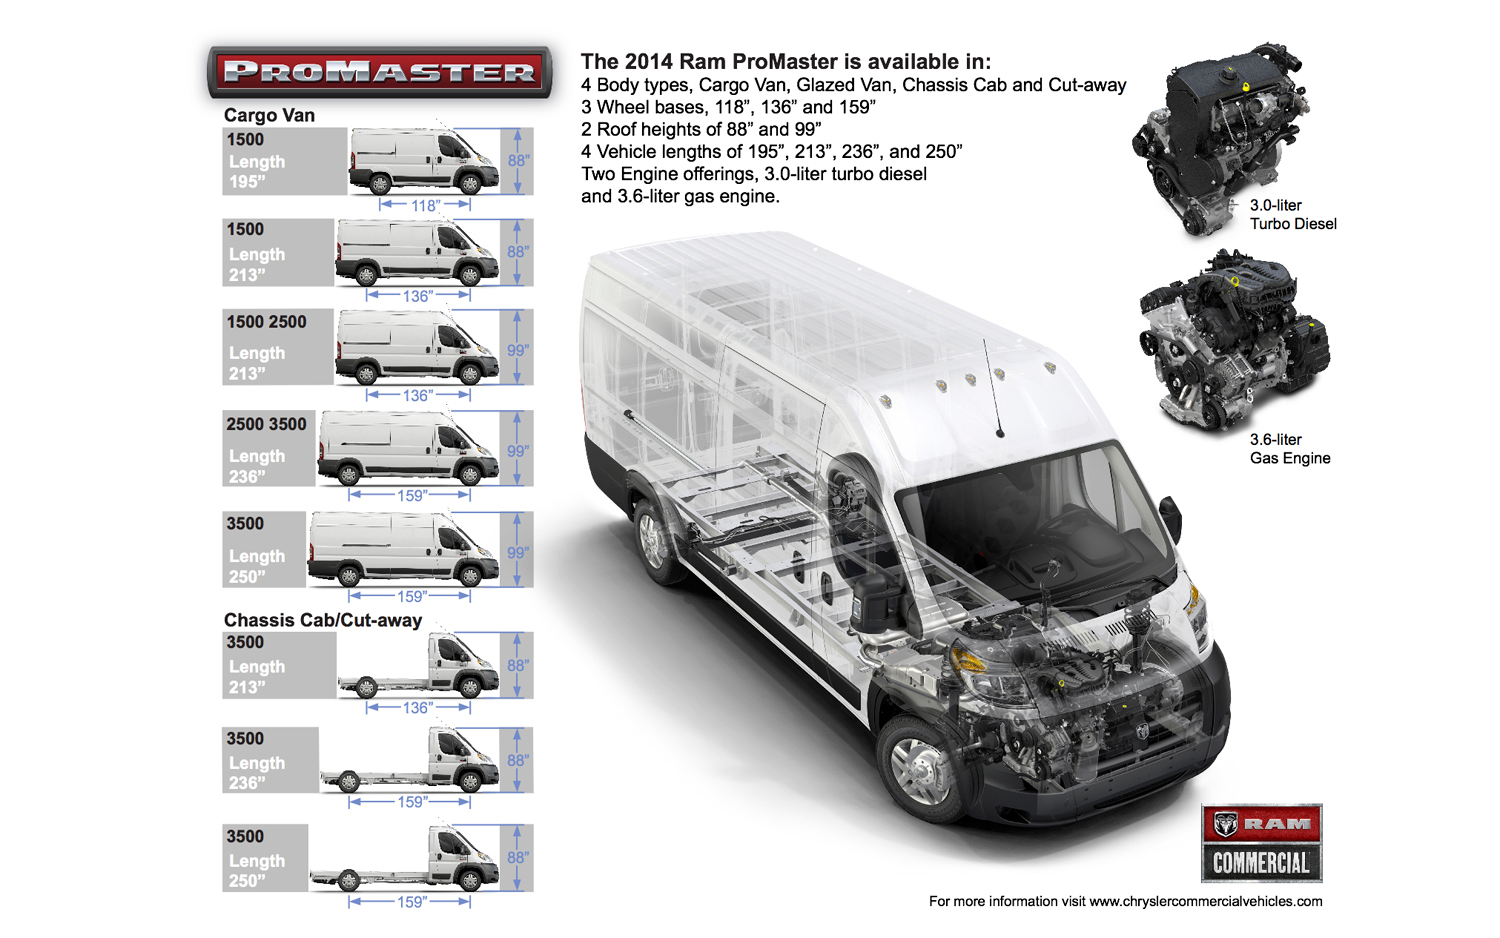 Junction Auto Family 2019 Ram Promaster Roof Height